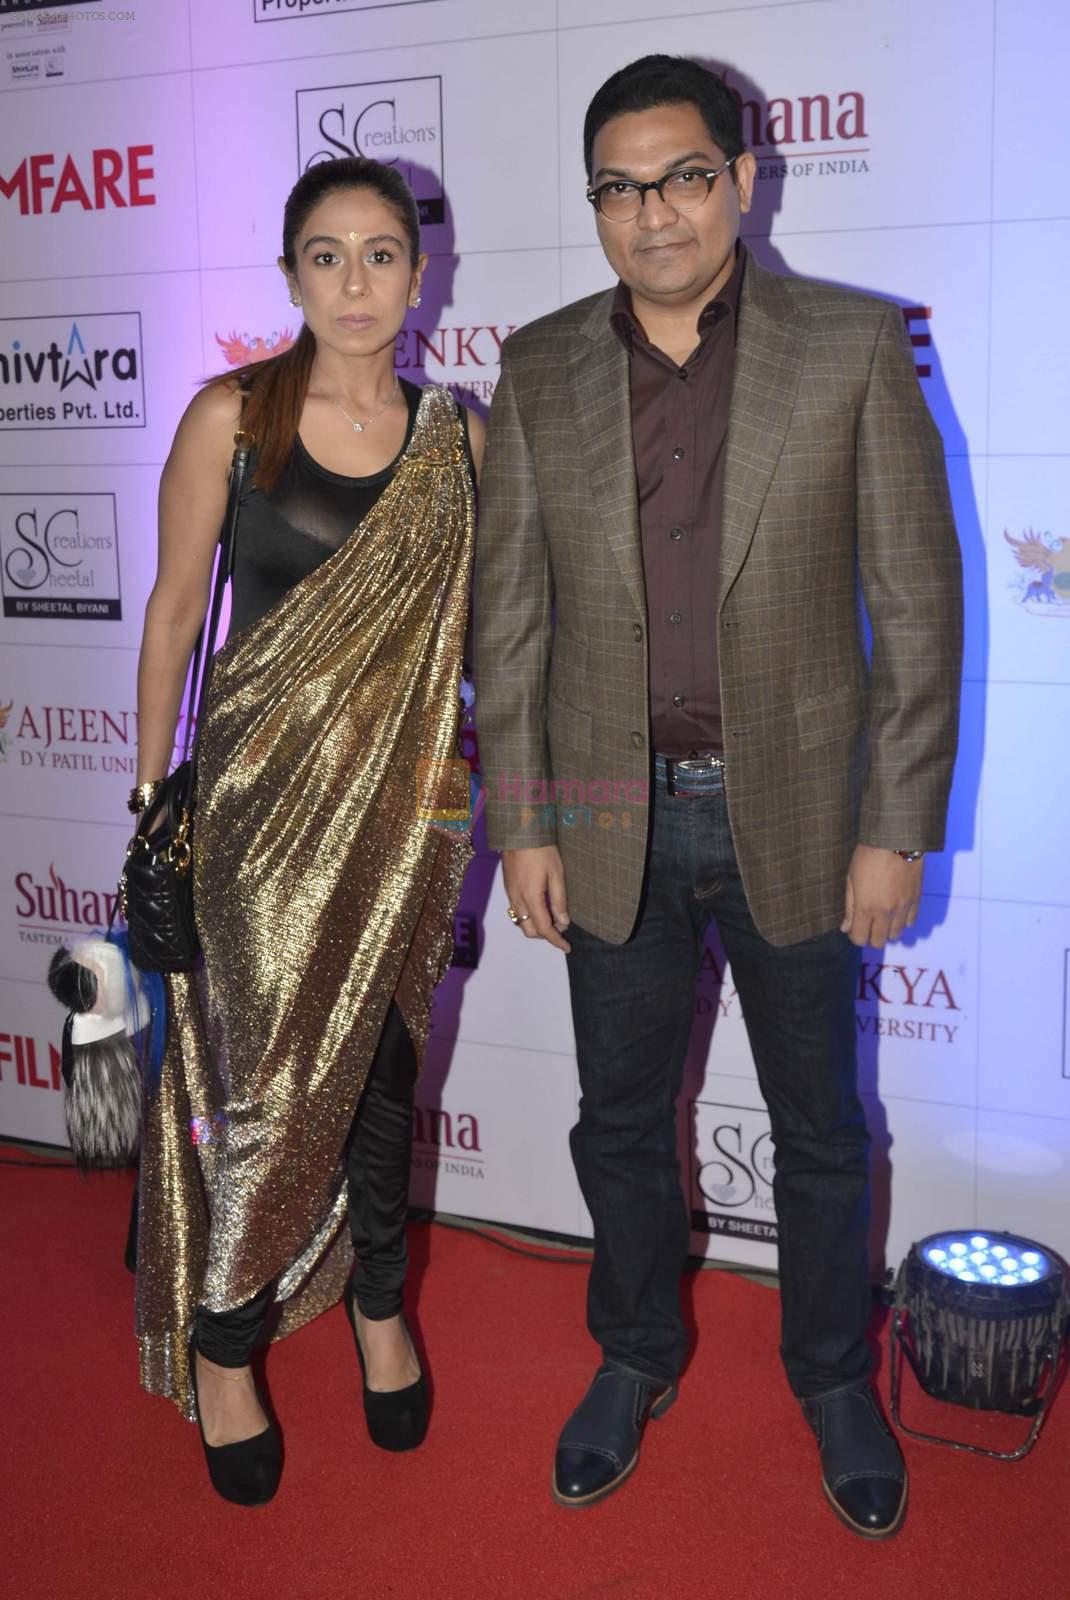 Dr. Ajeenkya D Y Patil (Chairman D Y Patil Group) with his wife at the Red Carpet of _Ajeenkya DY Patil University Filmfare Awards